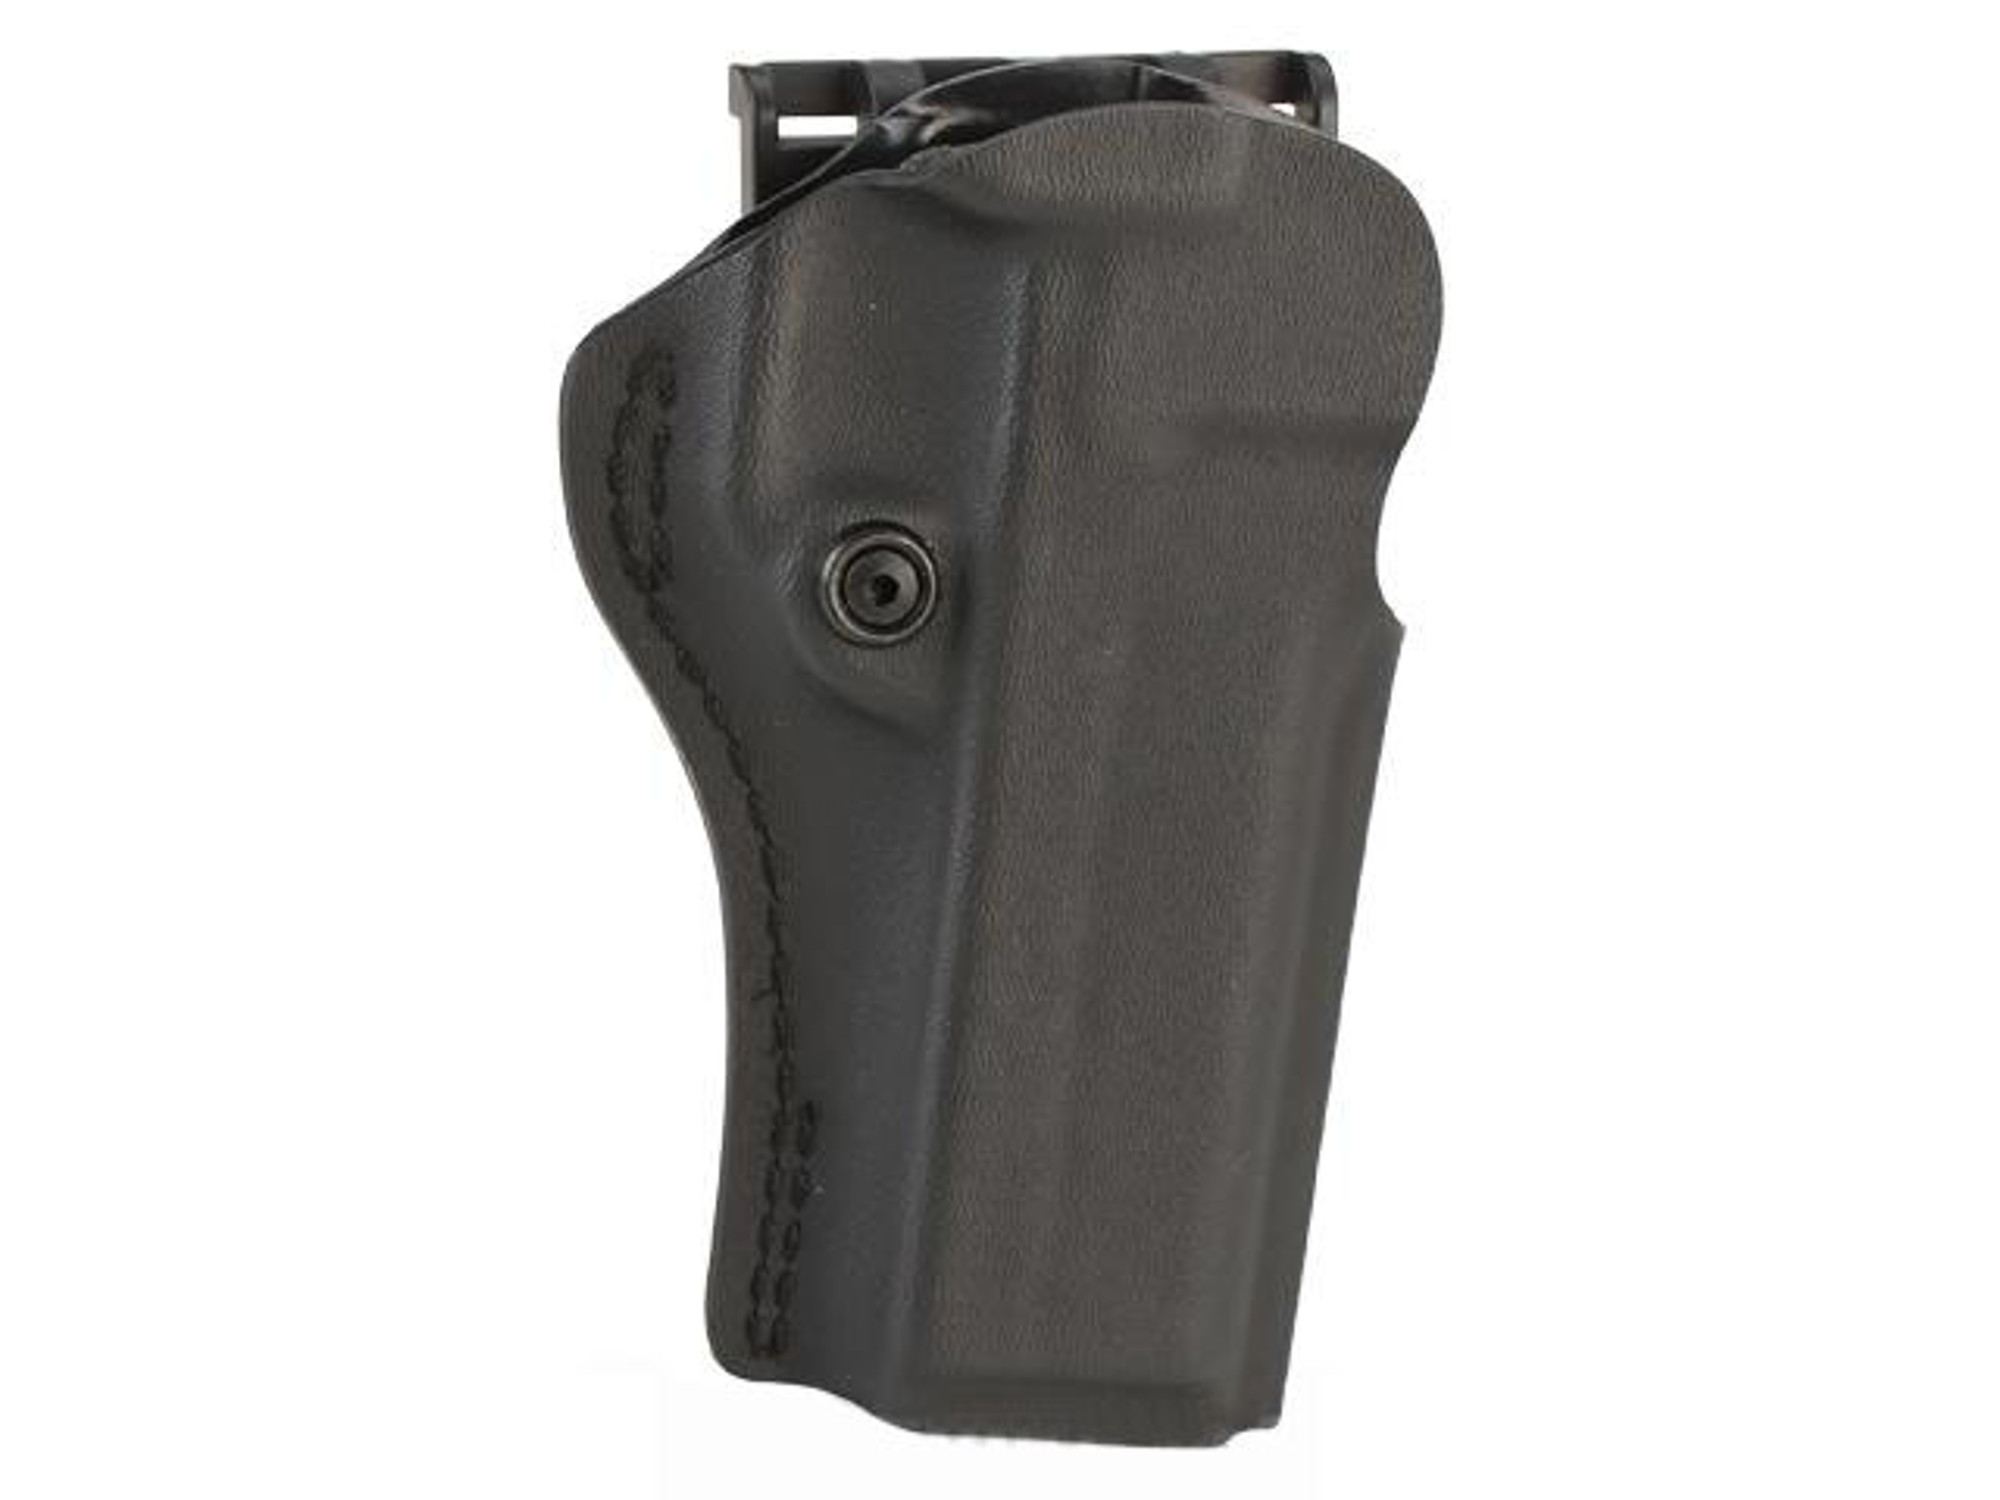 SAFARILAND Open Top Concealment MS19 Clip Holster with Detent - STI 2011 5  w/ Full Dust Cover (Right) - Hero Outdoors